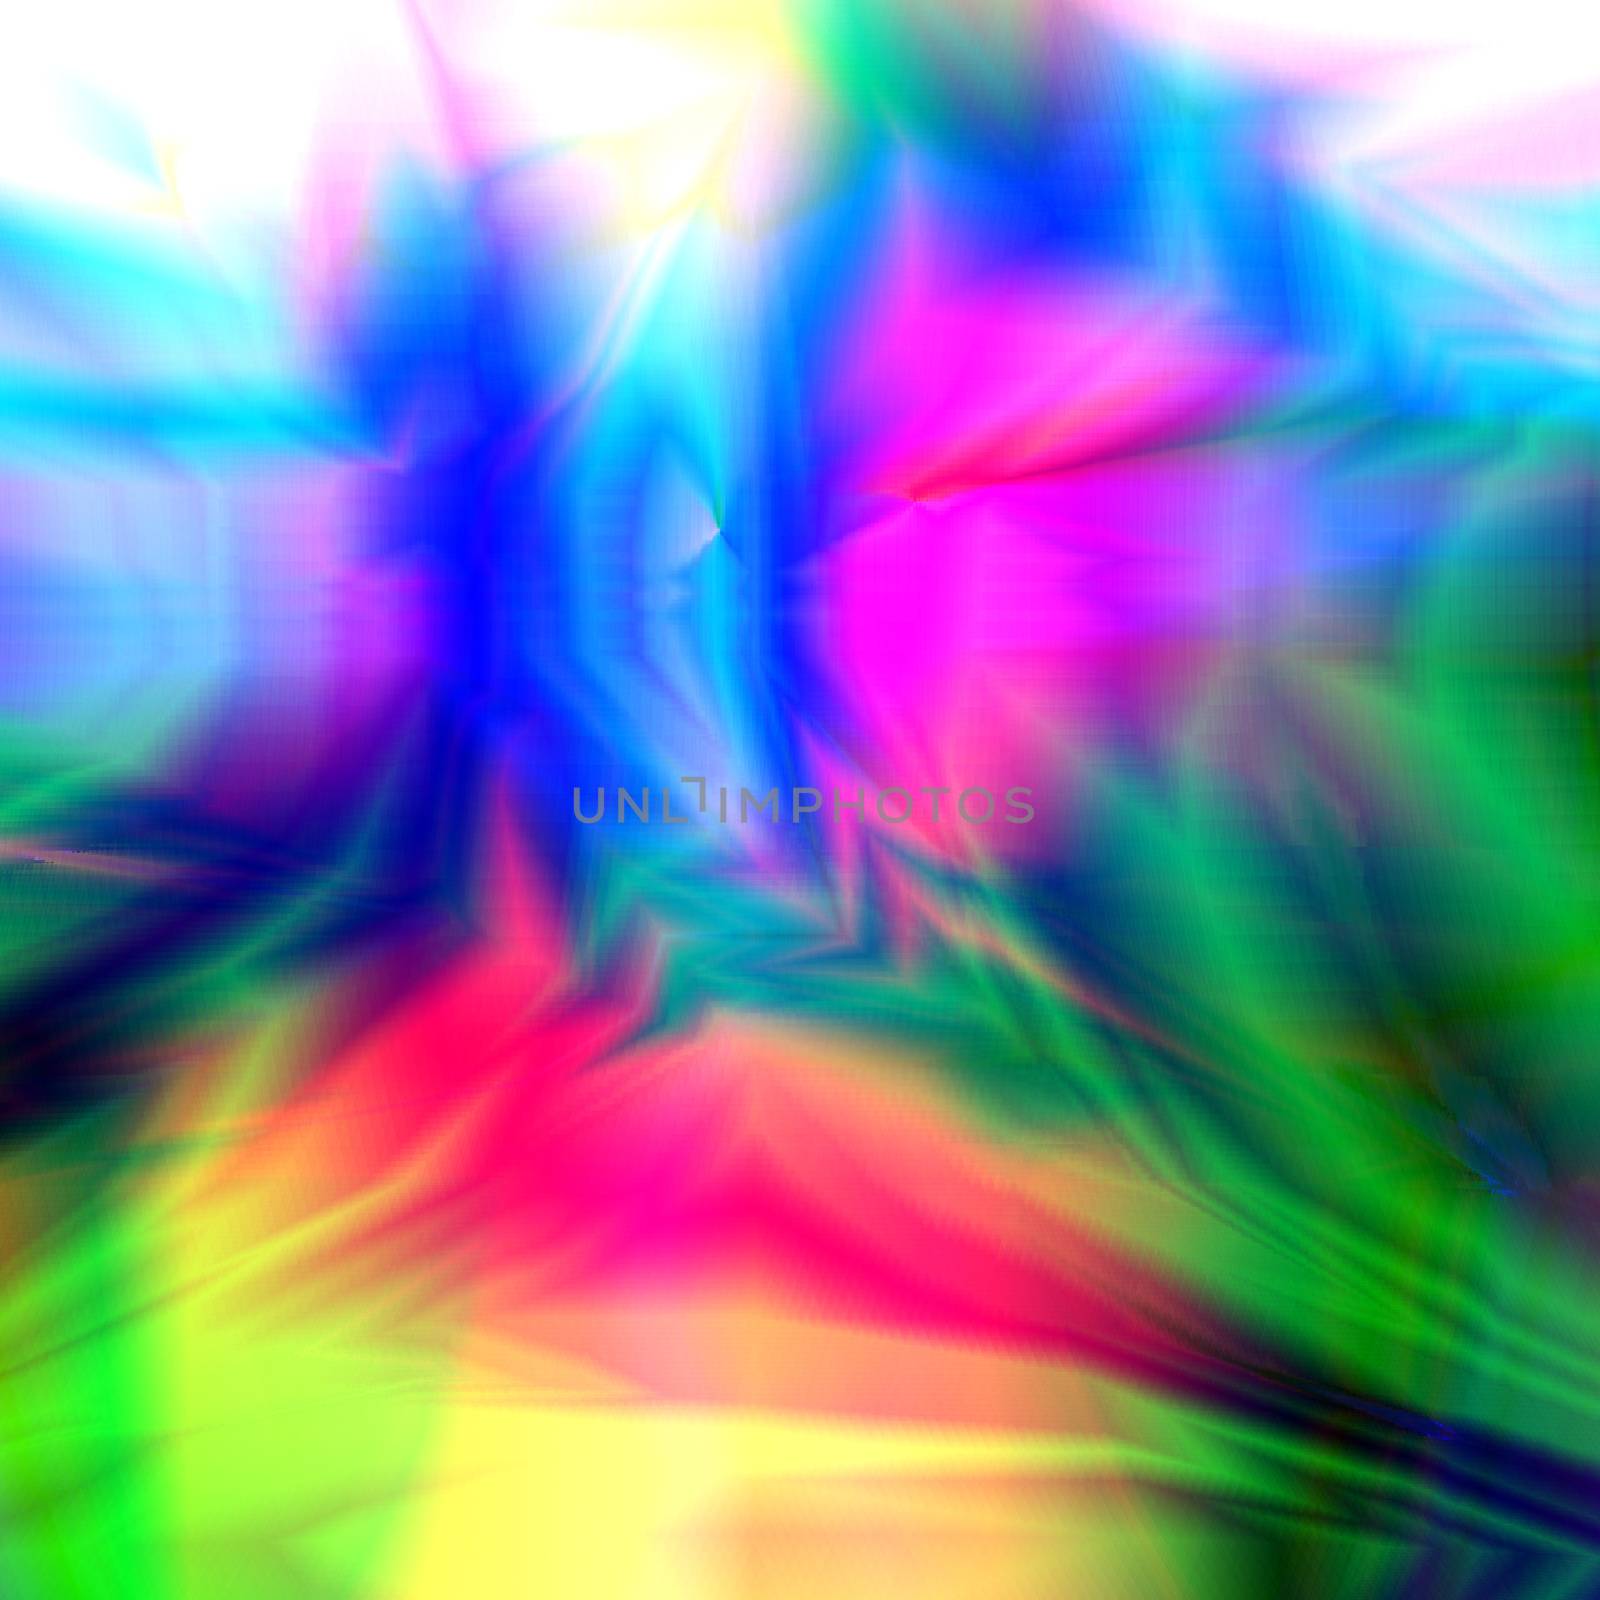 Colorful abstract glitched background for designs. Digital image data distortion with gradient